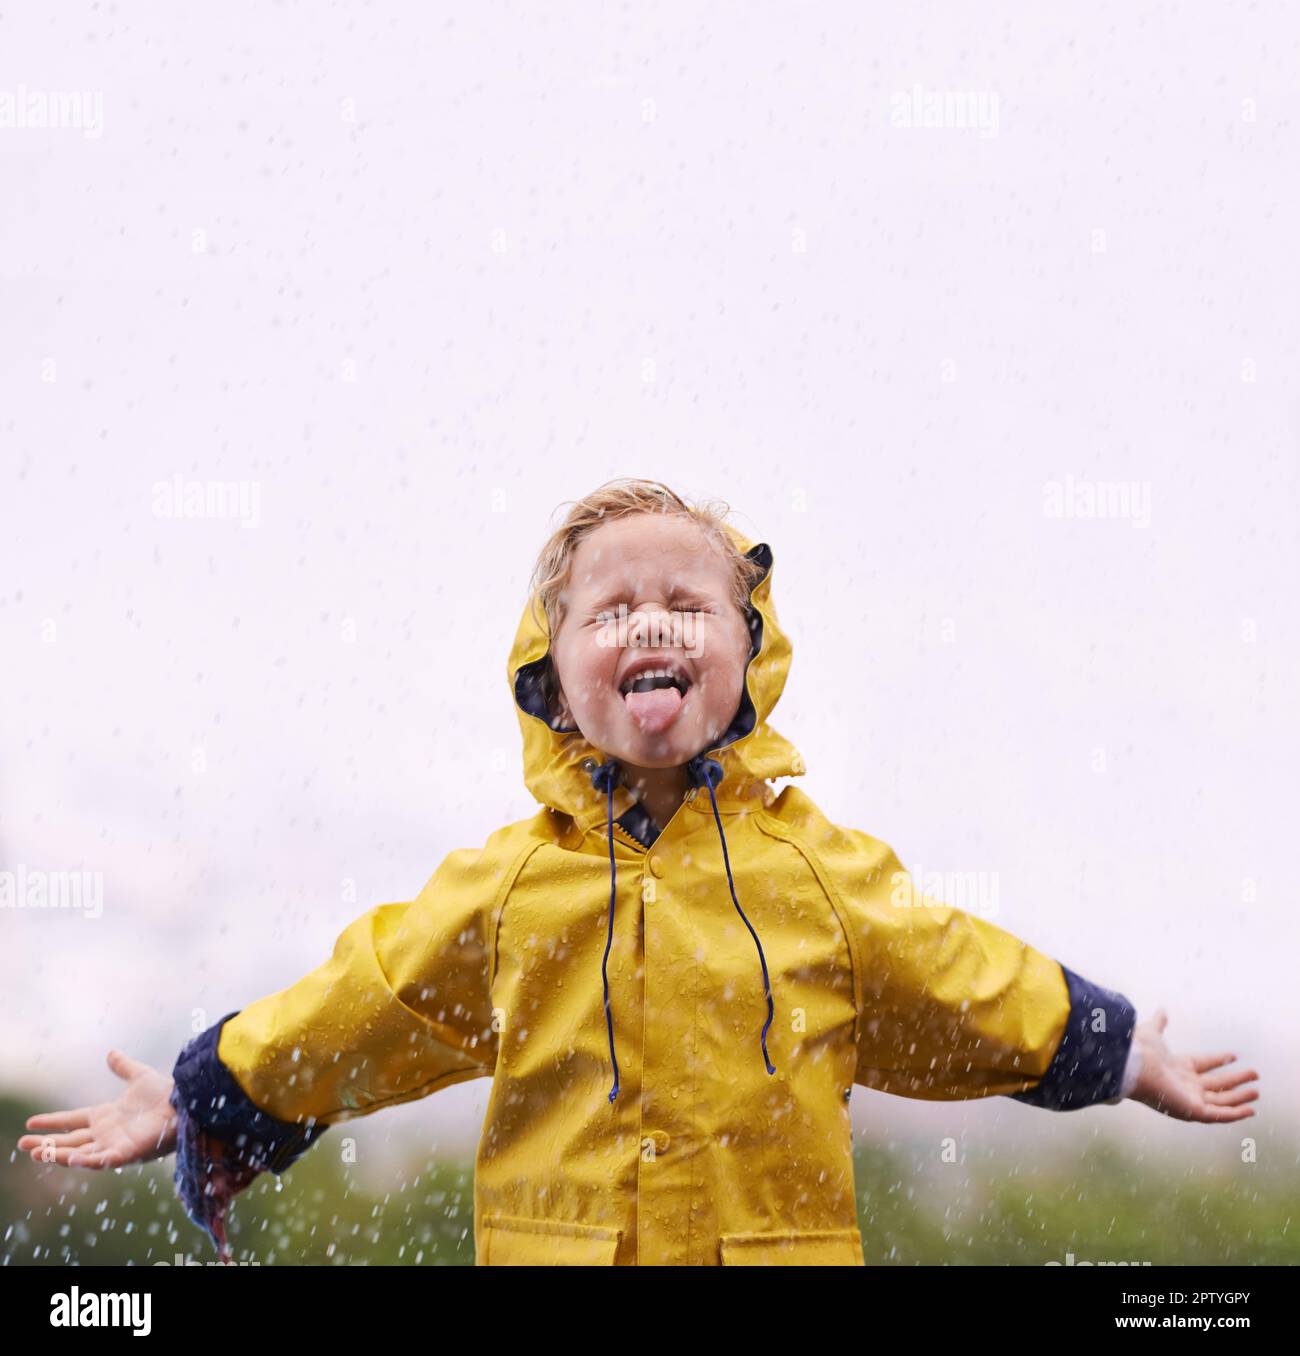 Dancing in the rain. an adorable little girl playing outside in the rain  Stock Photo - Alamy